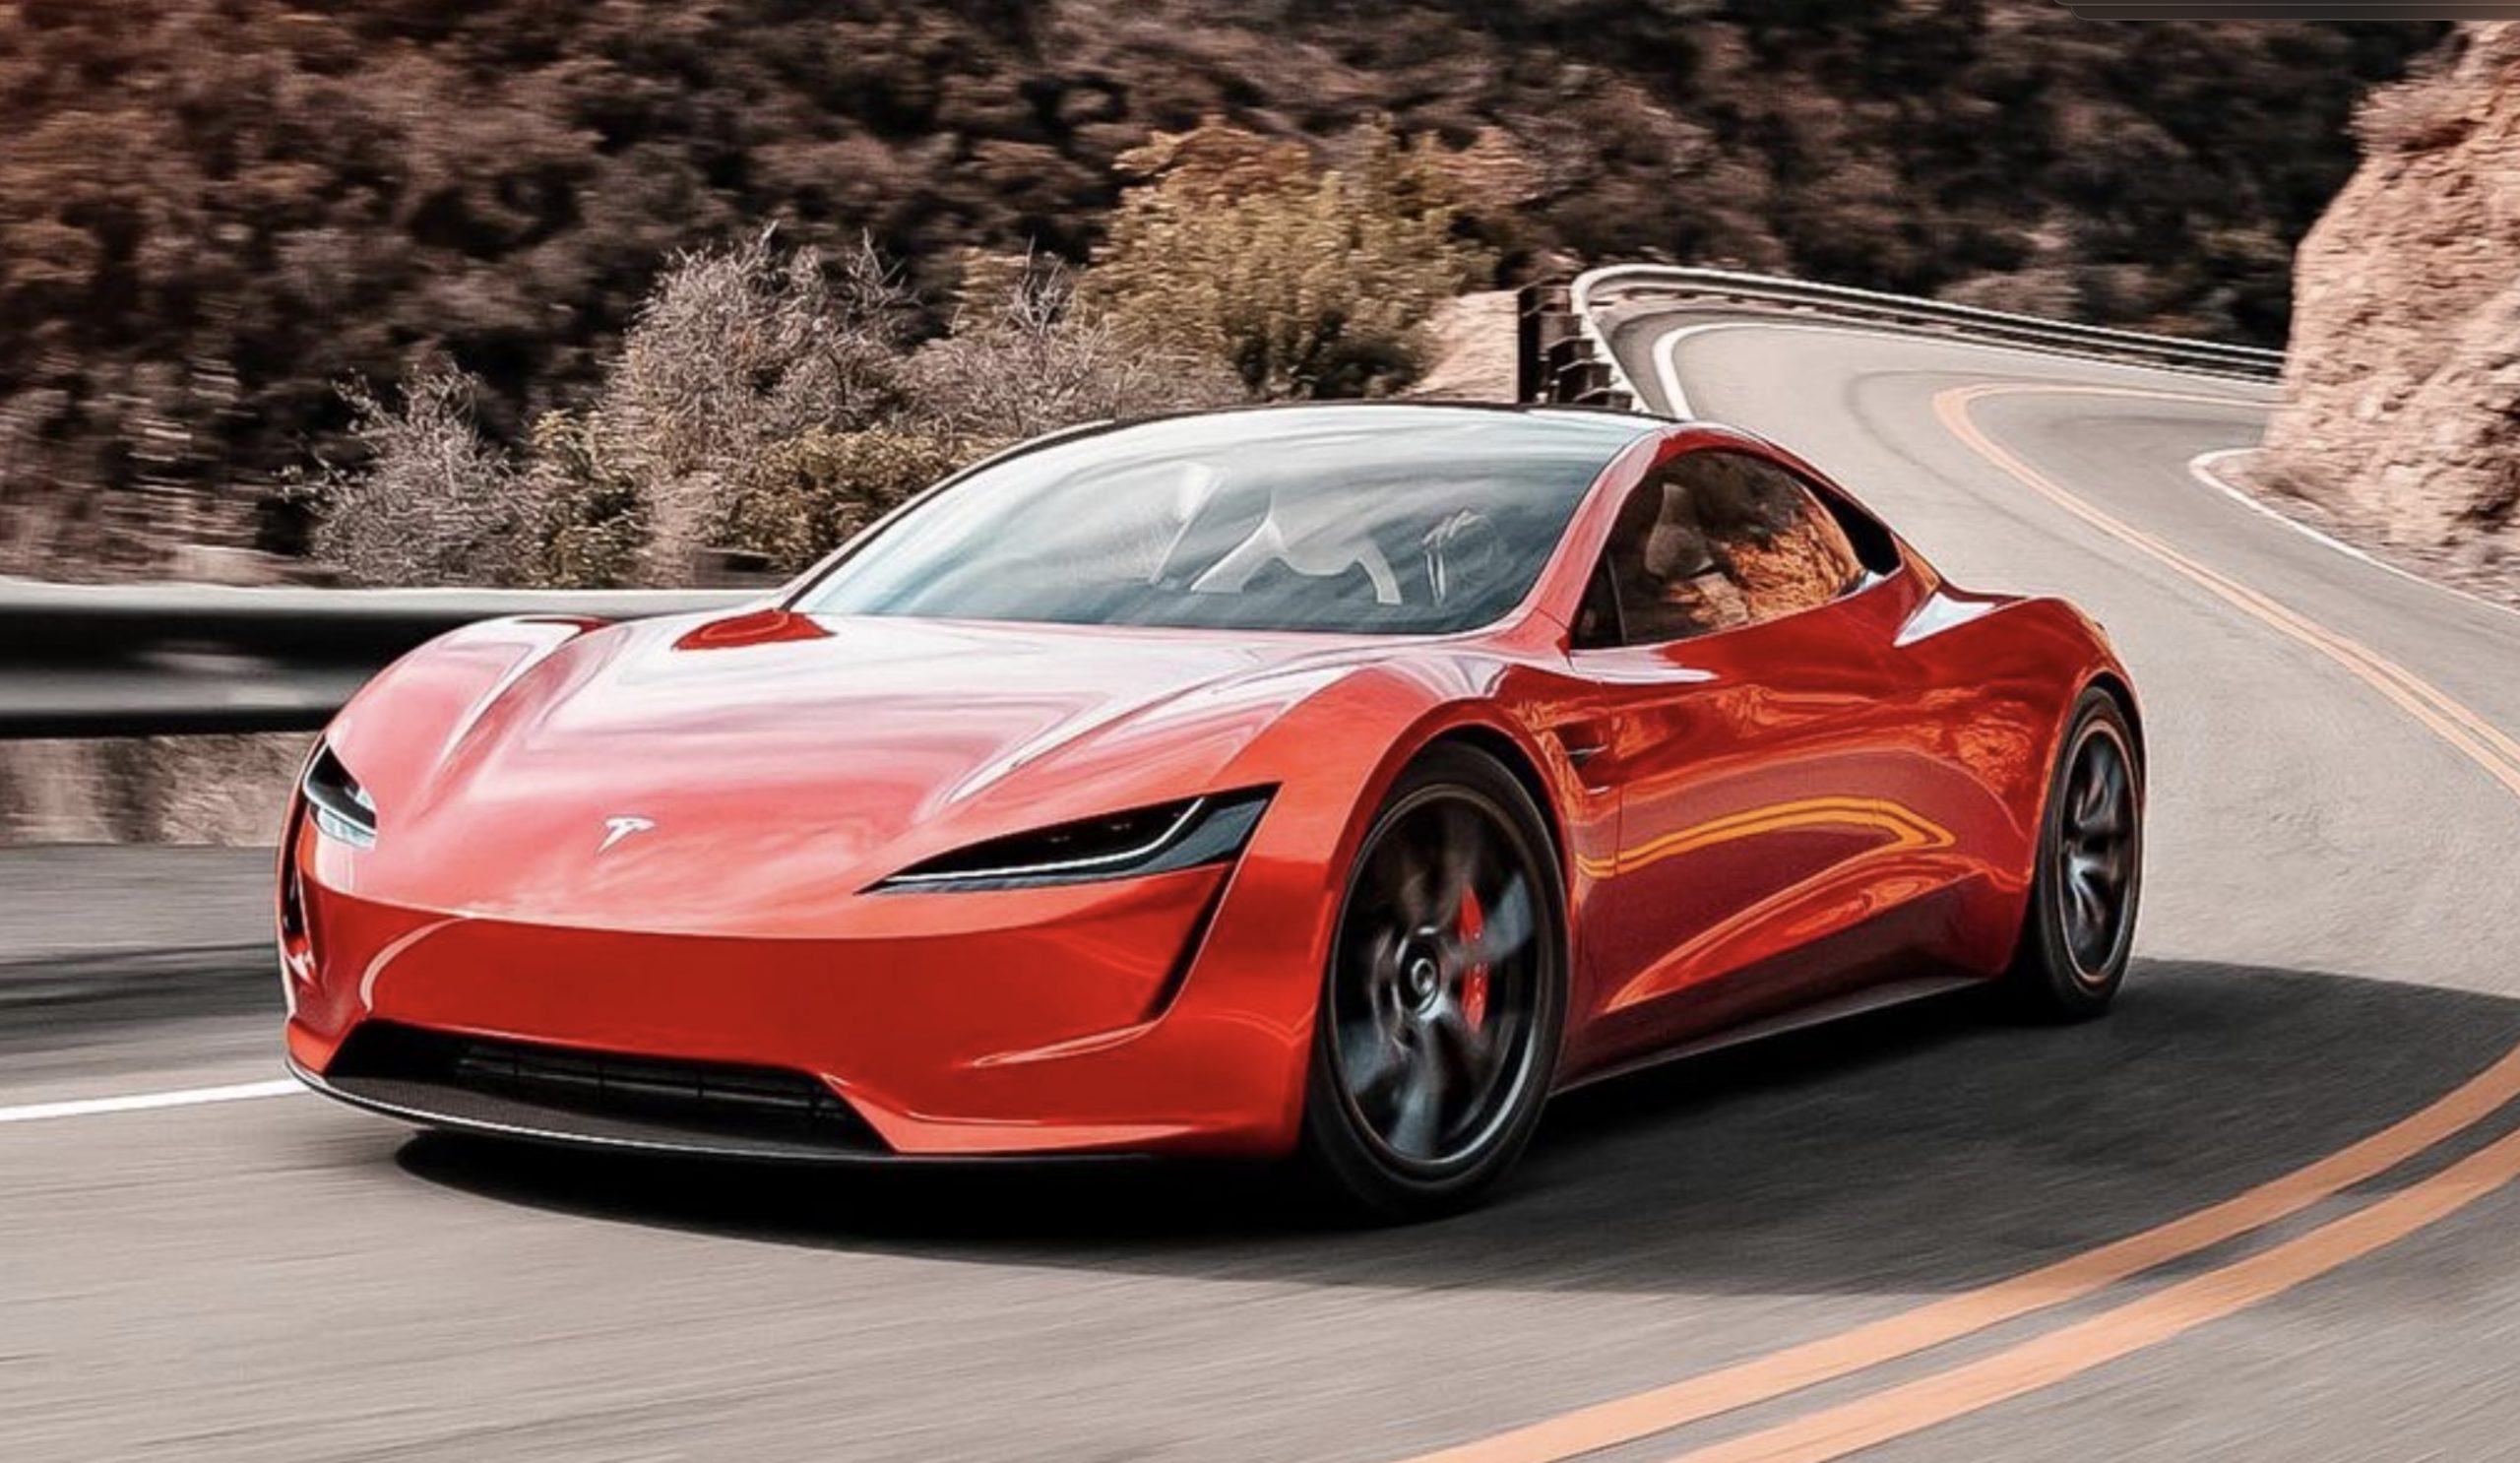 tesla-roadster-production-release-candidate-scaled.jpg